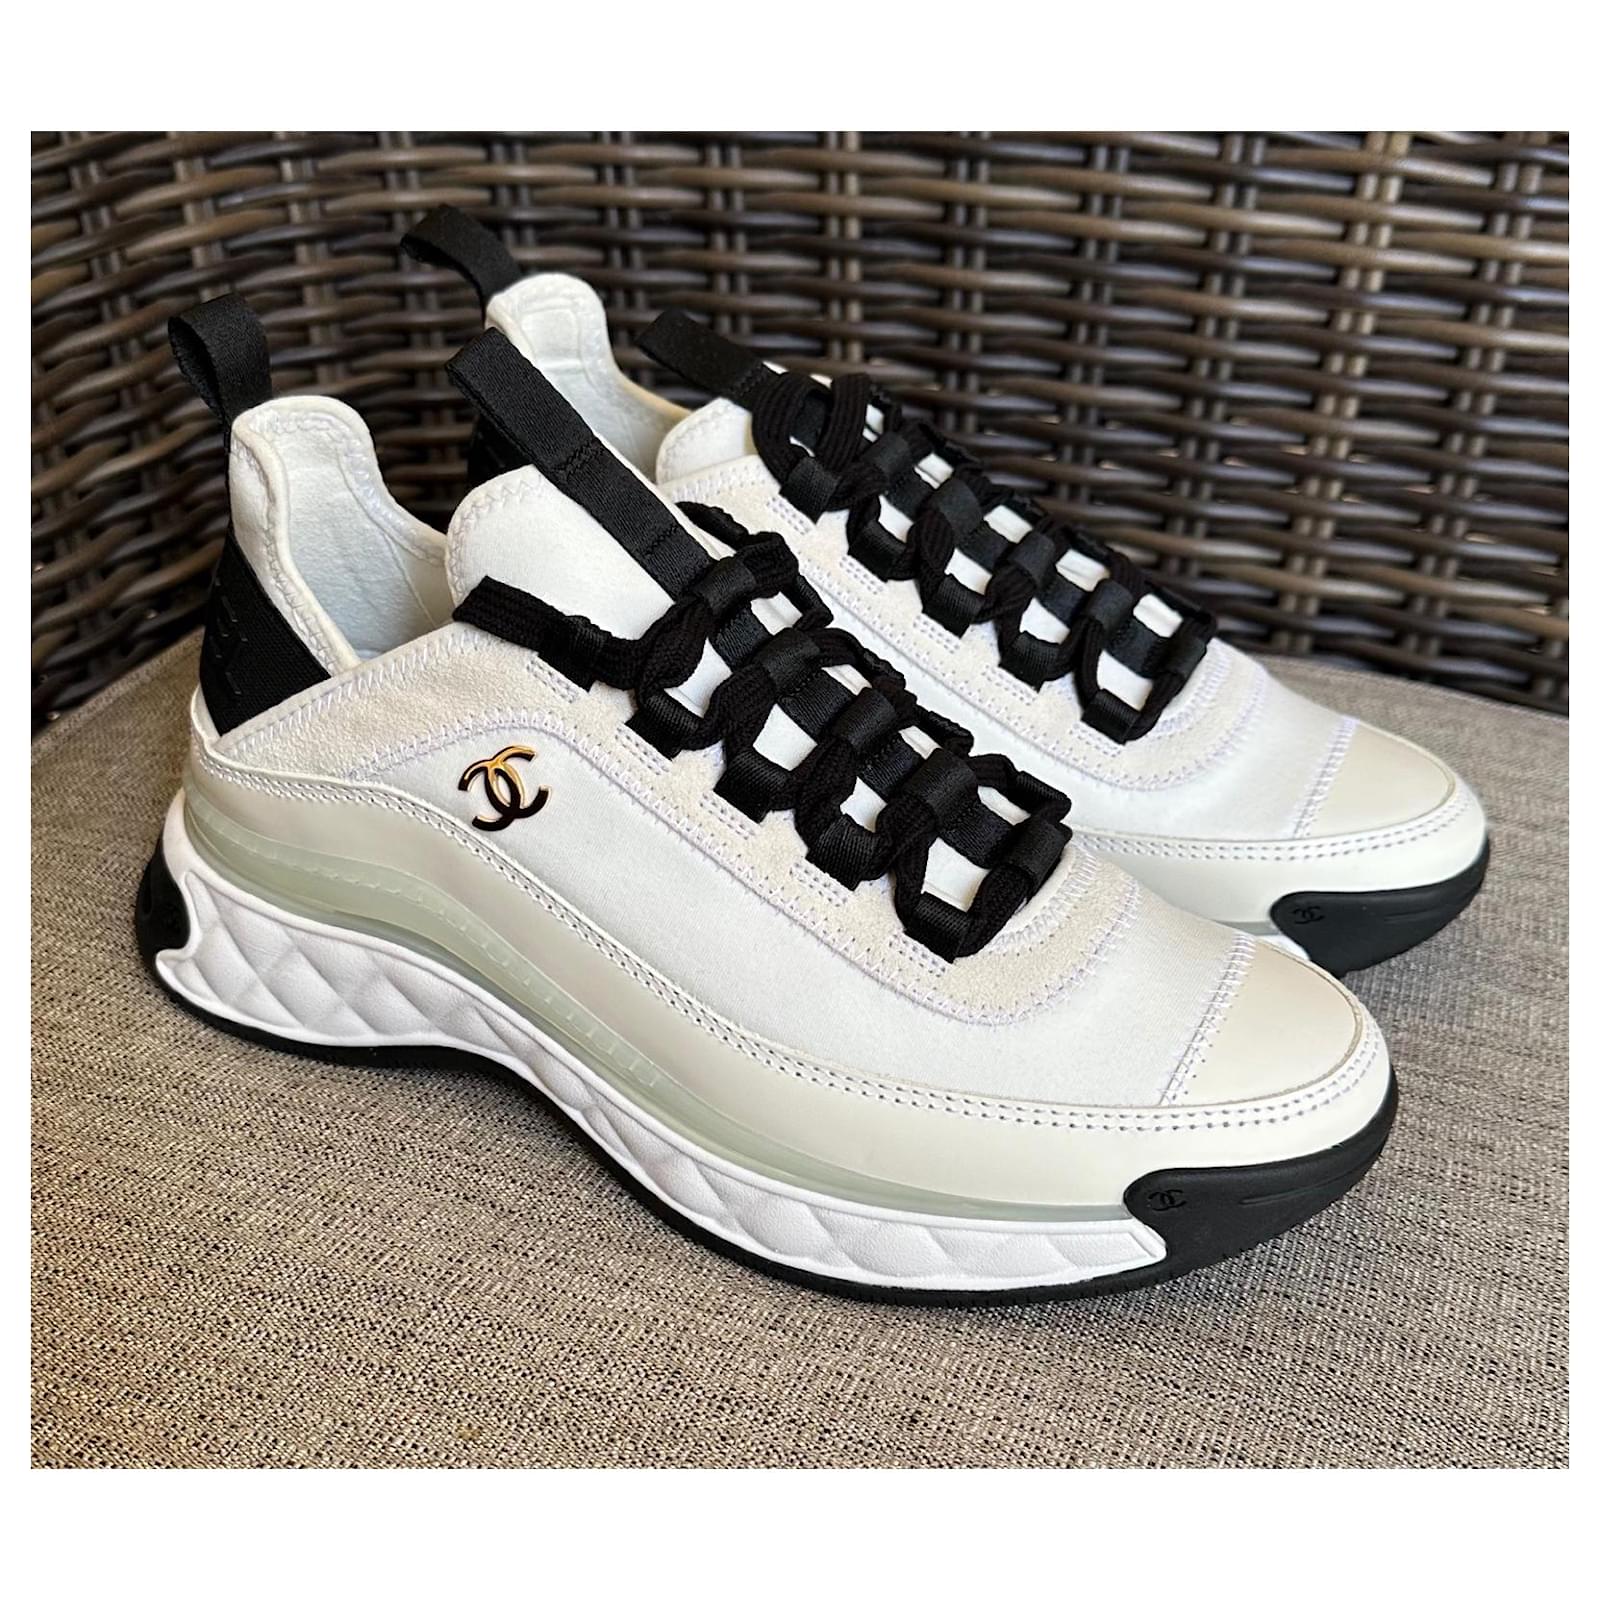 chanel white sneakers 2020